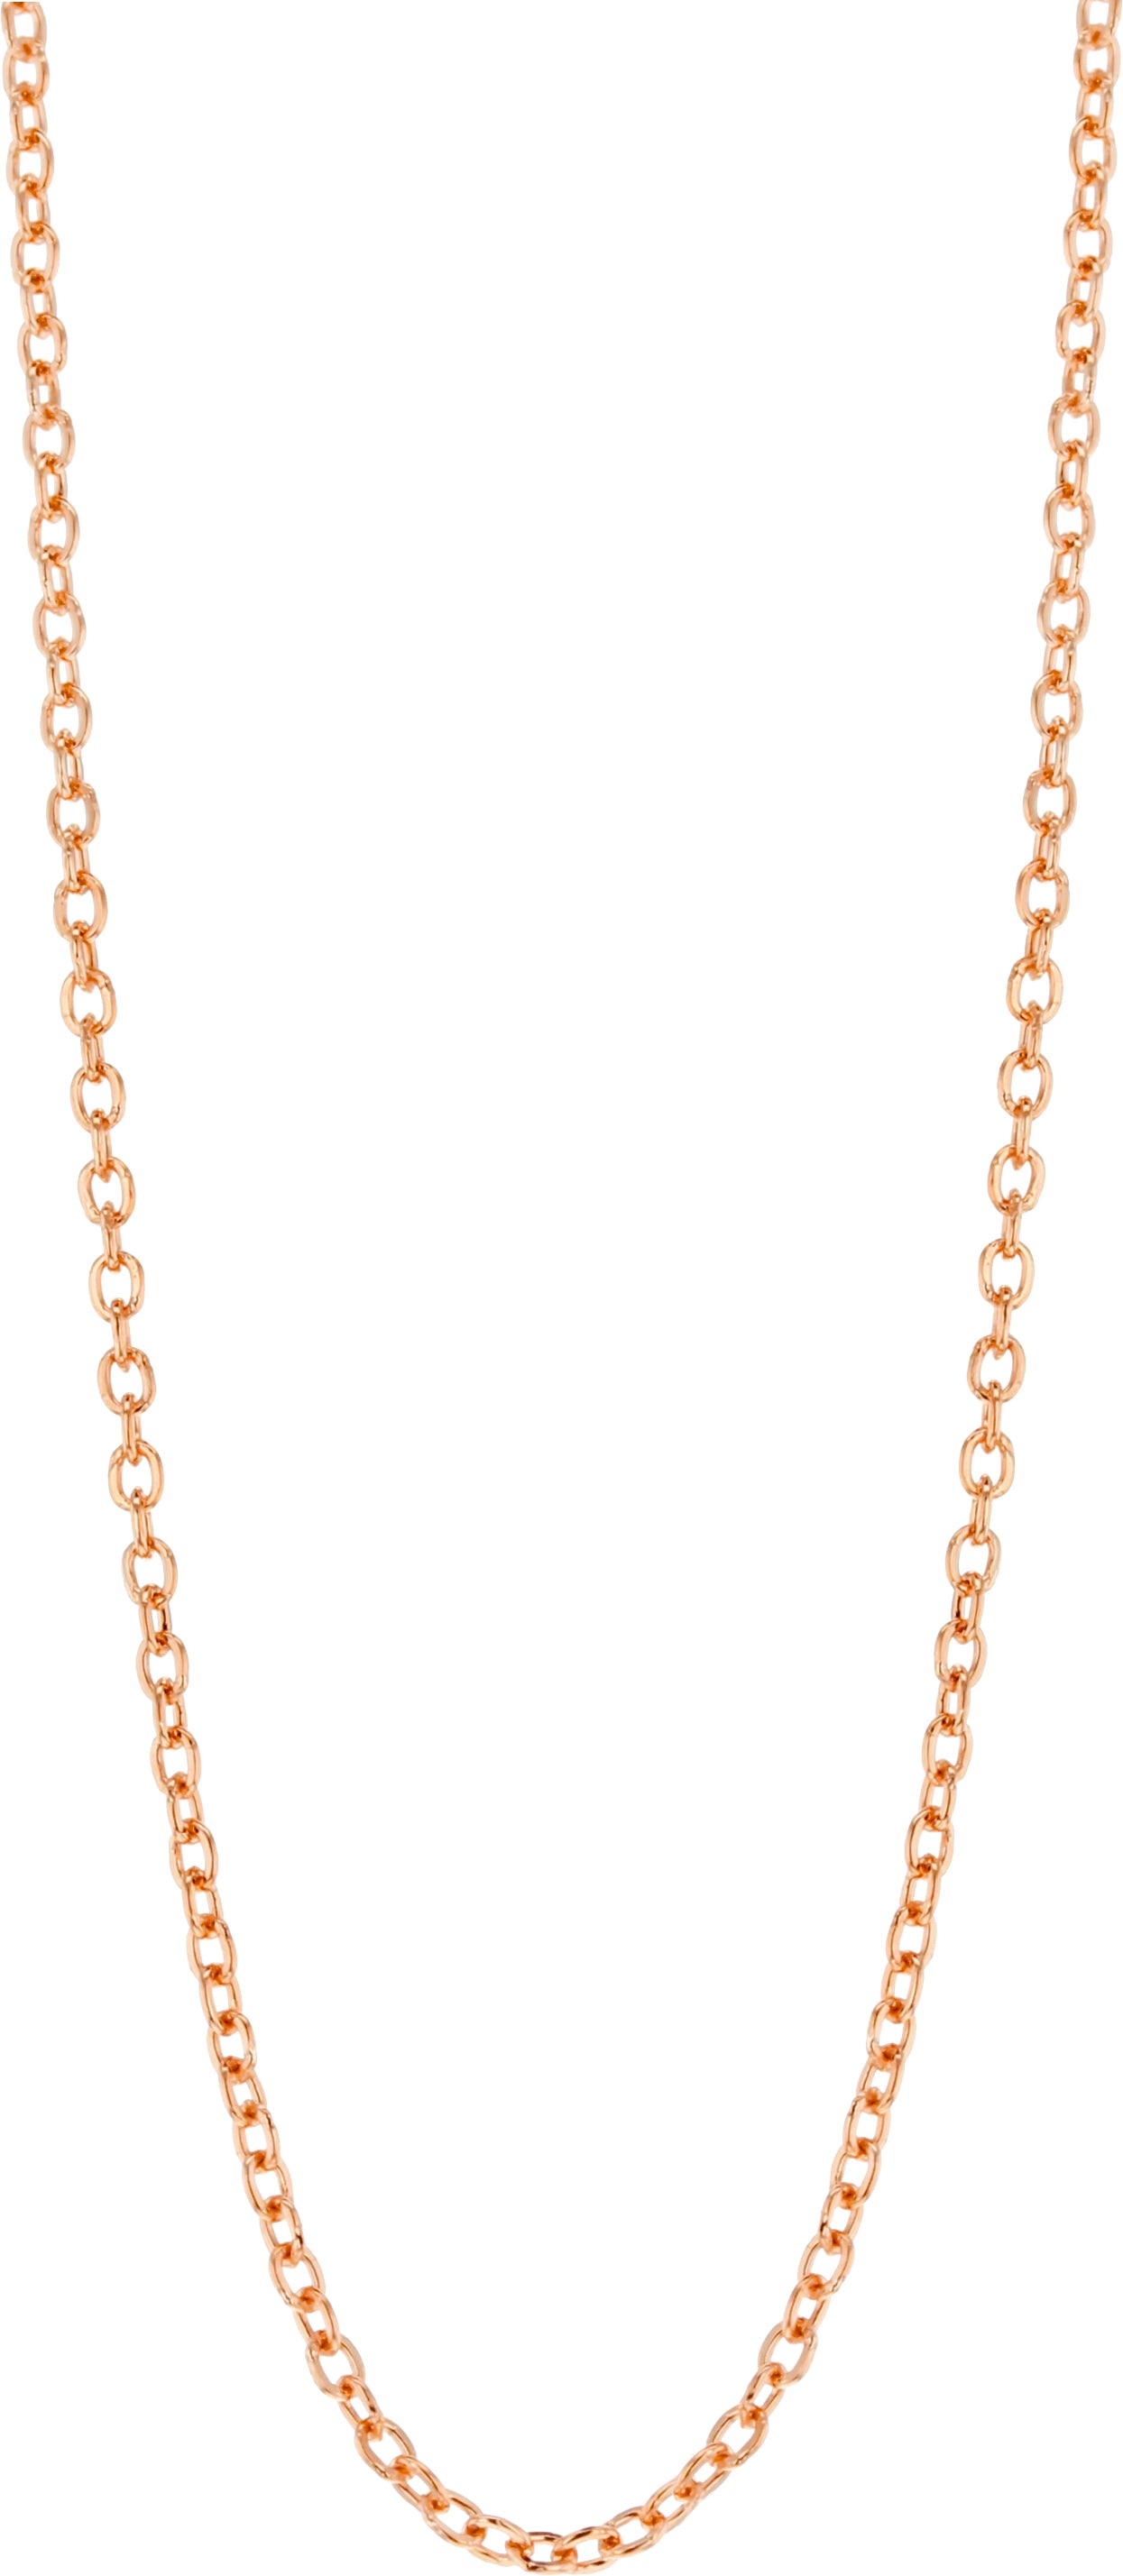 9ct Rose Gold Hammered Cable Link Chain - 45cm